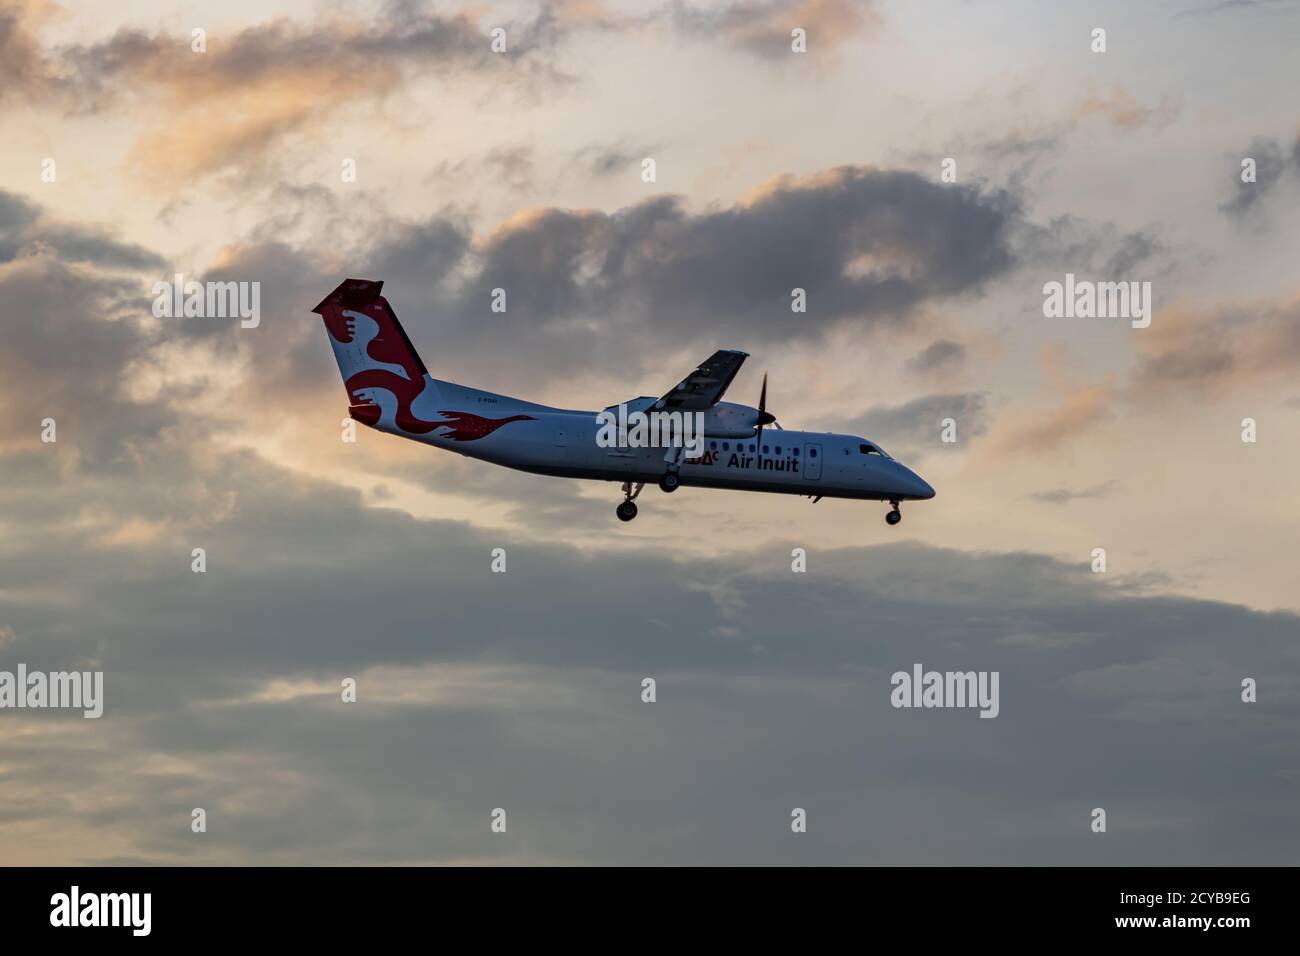 Montreal, Quebec / Canada - 07/15/2020 : Air Inuit Dash 8-300 landing at Montreal's Trudeau airport on a summer's evening. Stock Photo